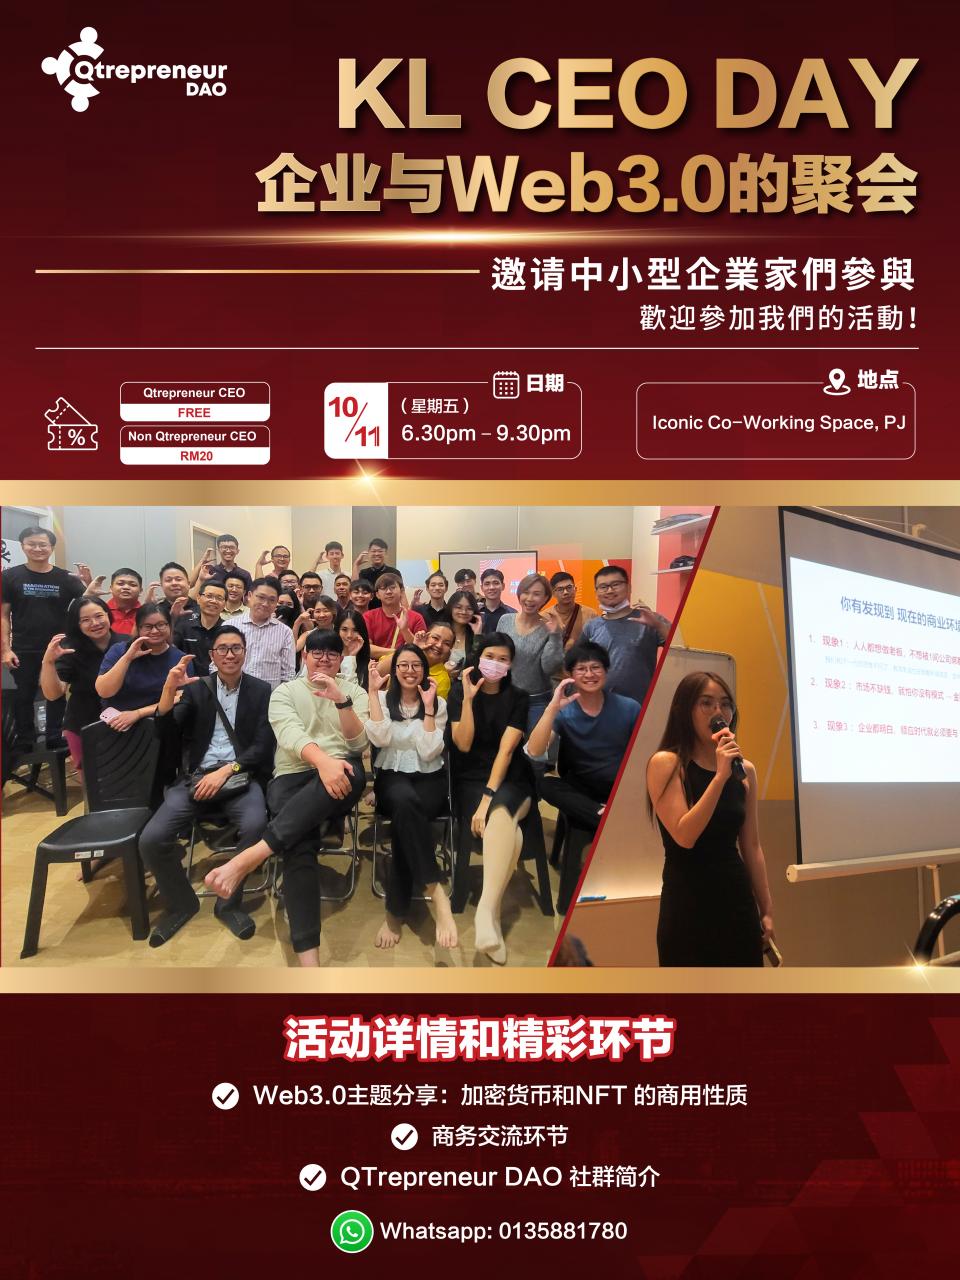 KL CEO DAY 企业与Web 3.0的聚会 Cover